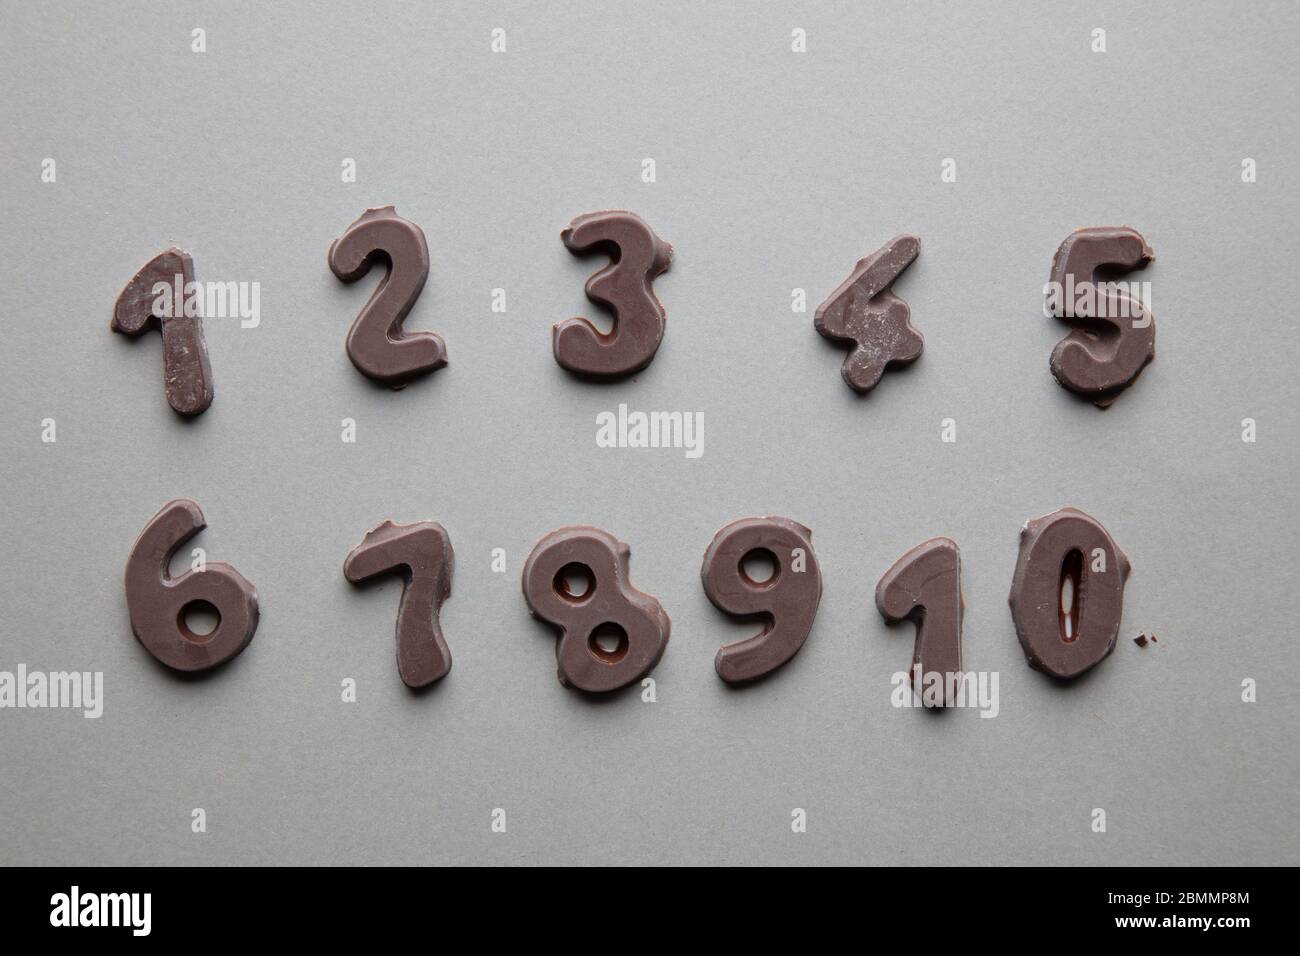 an artsy studio shot of chocolate numbers in chronological order against a grey background Stock Photo